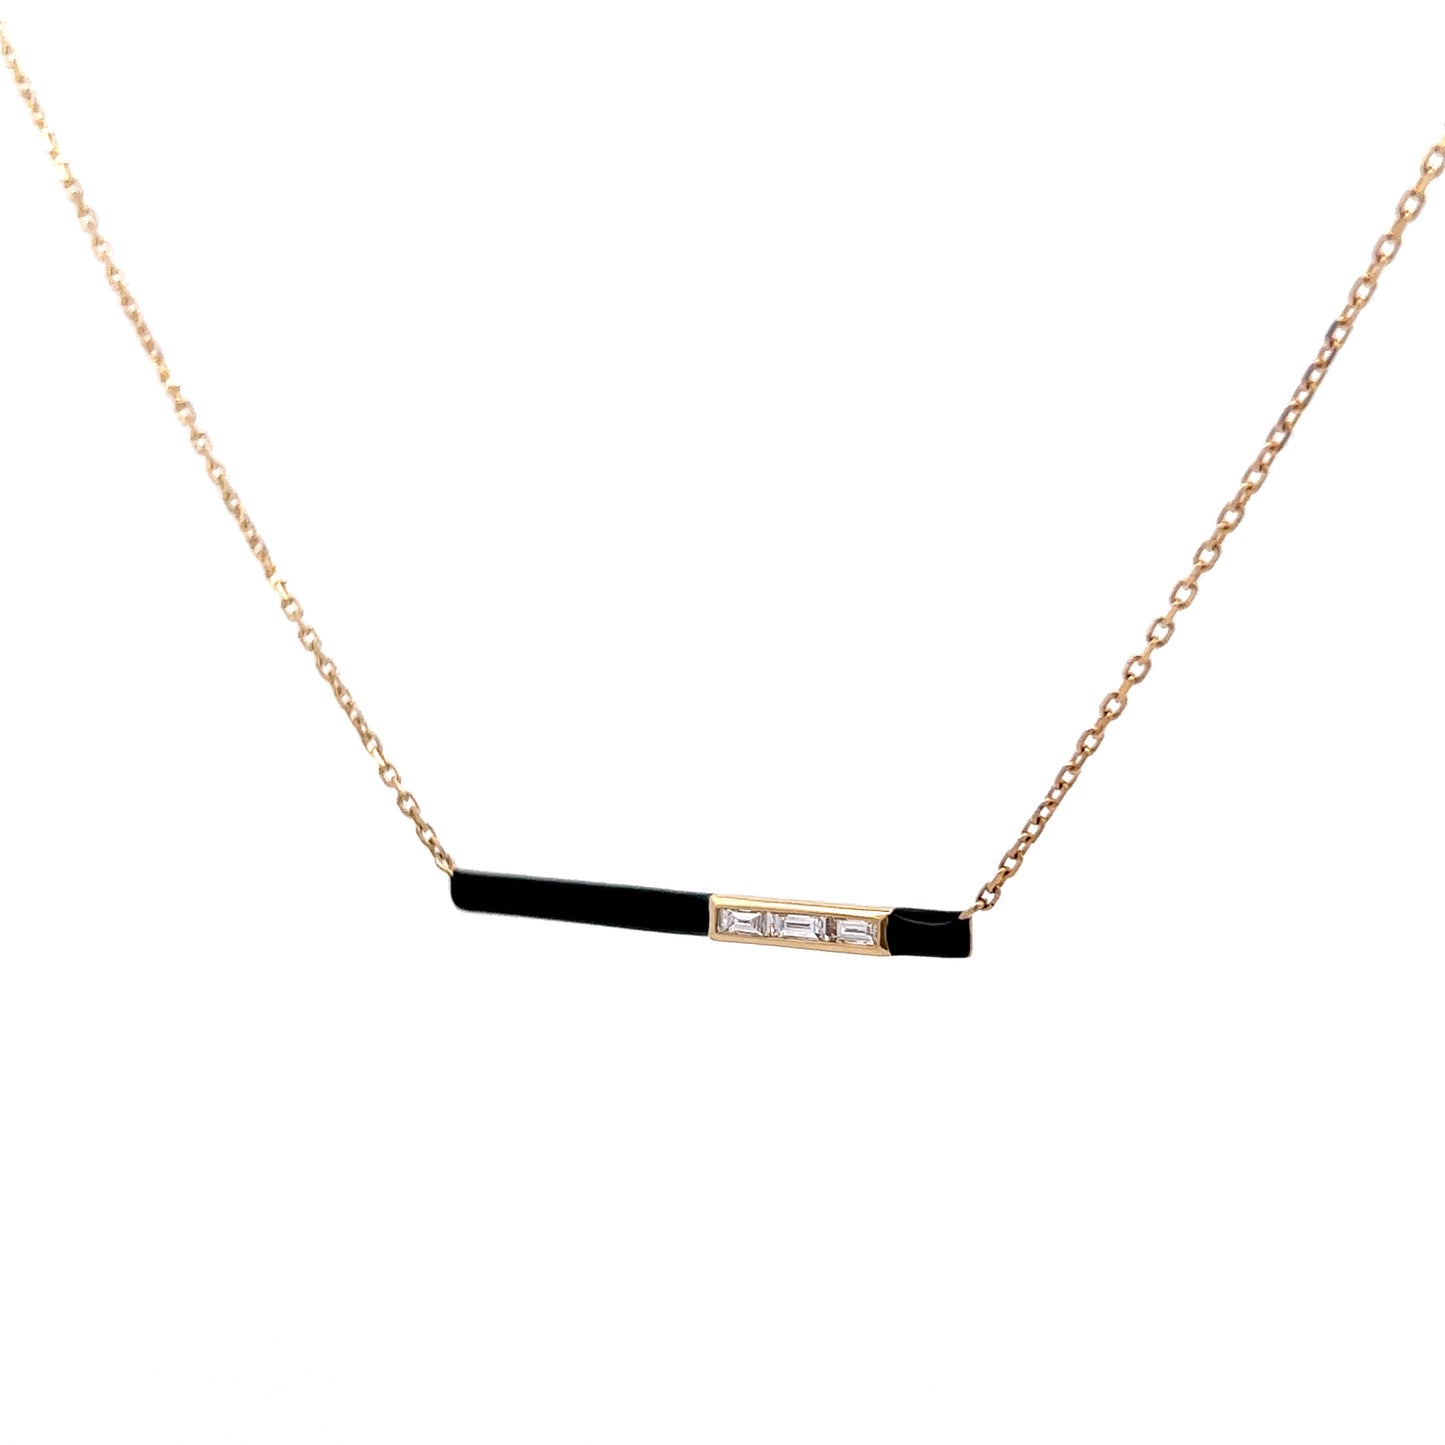 .24 Baguette Diamond Pendant Necklace in 14k Yellow Gold